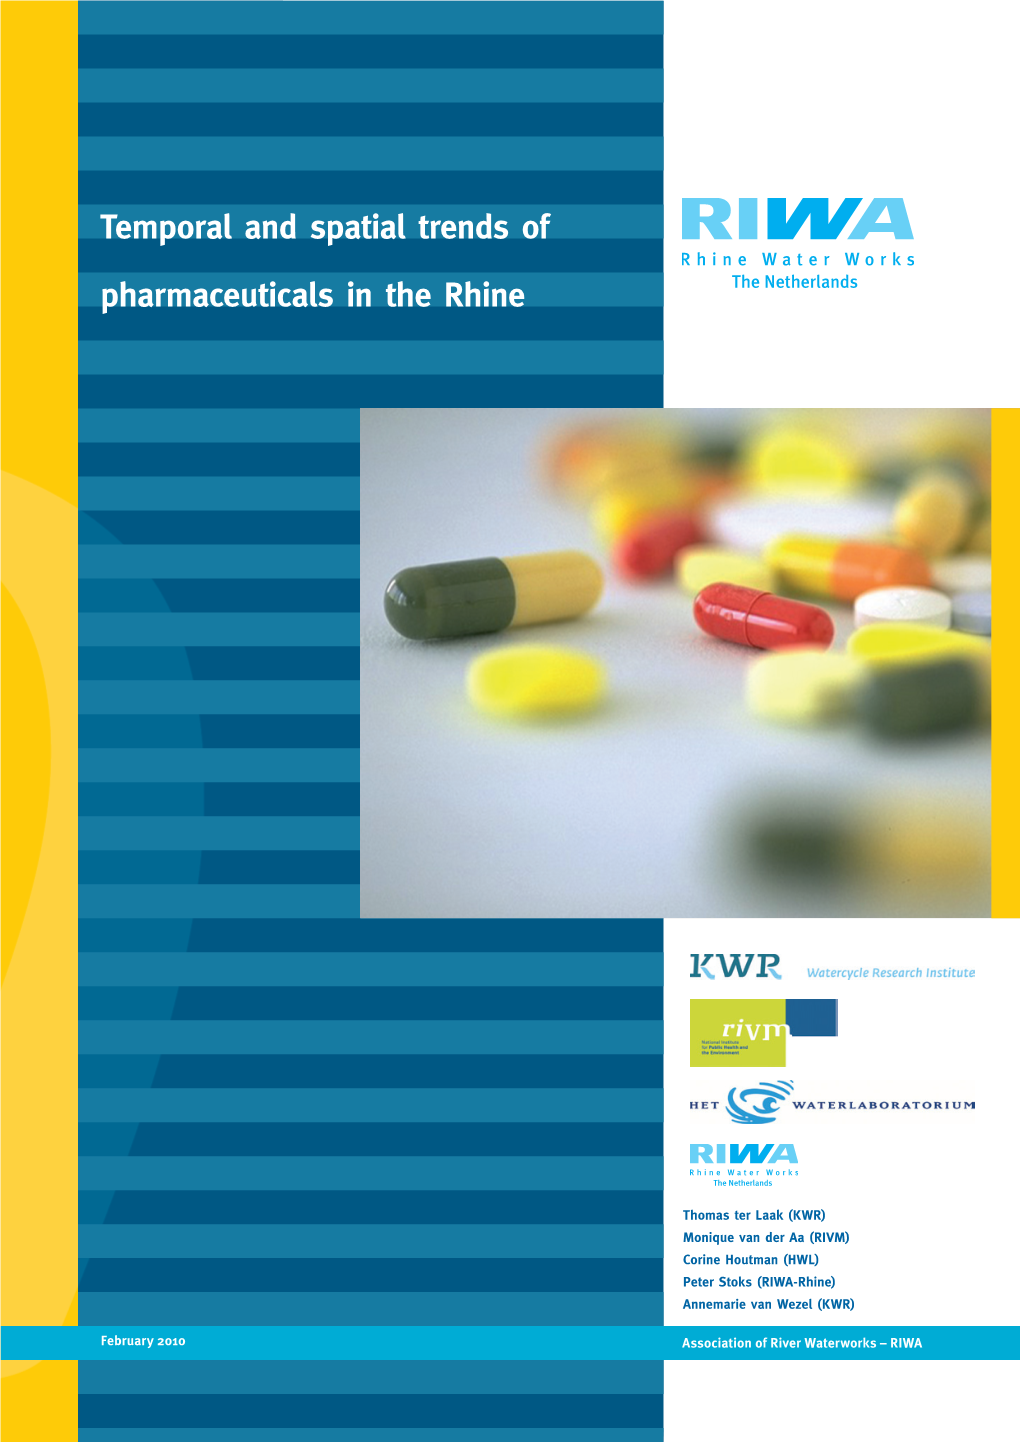 Temporal and Spatial Trends of Pharmaceuticals in the Rhine